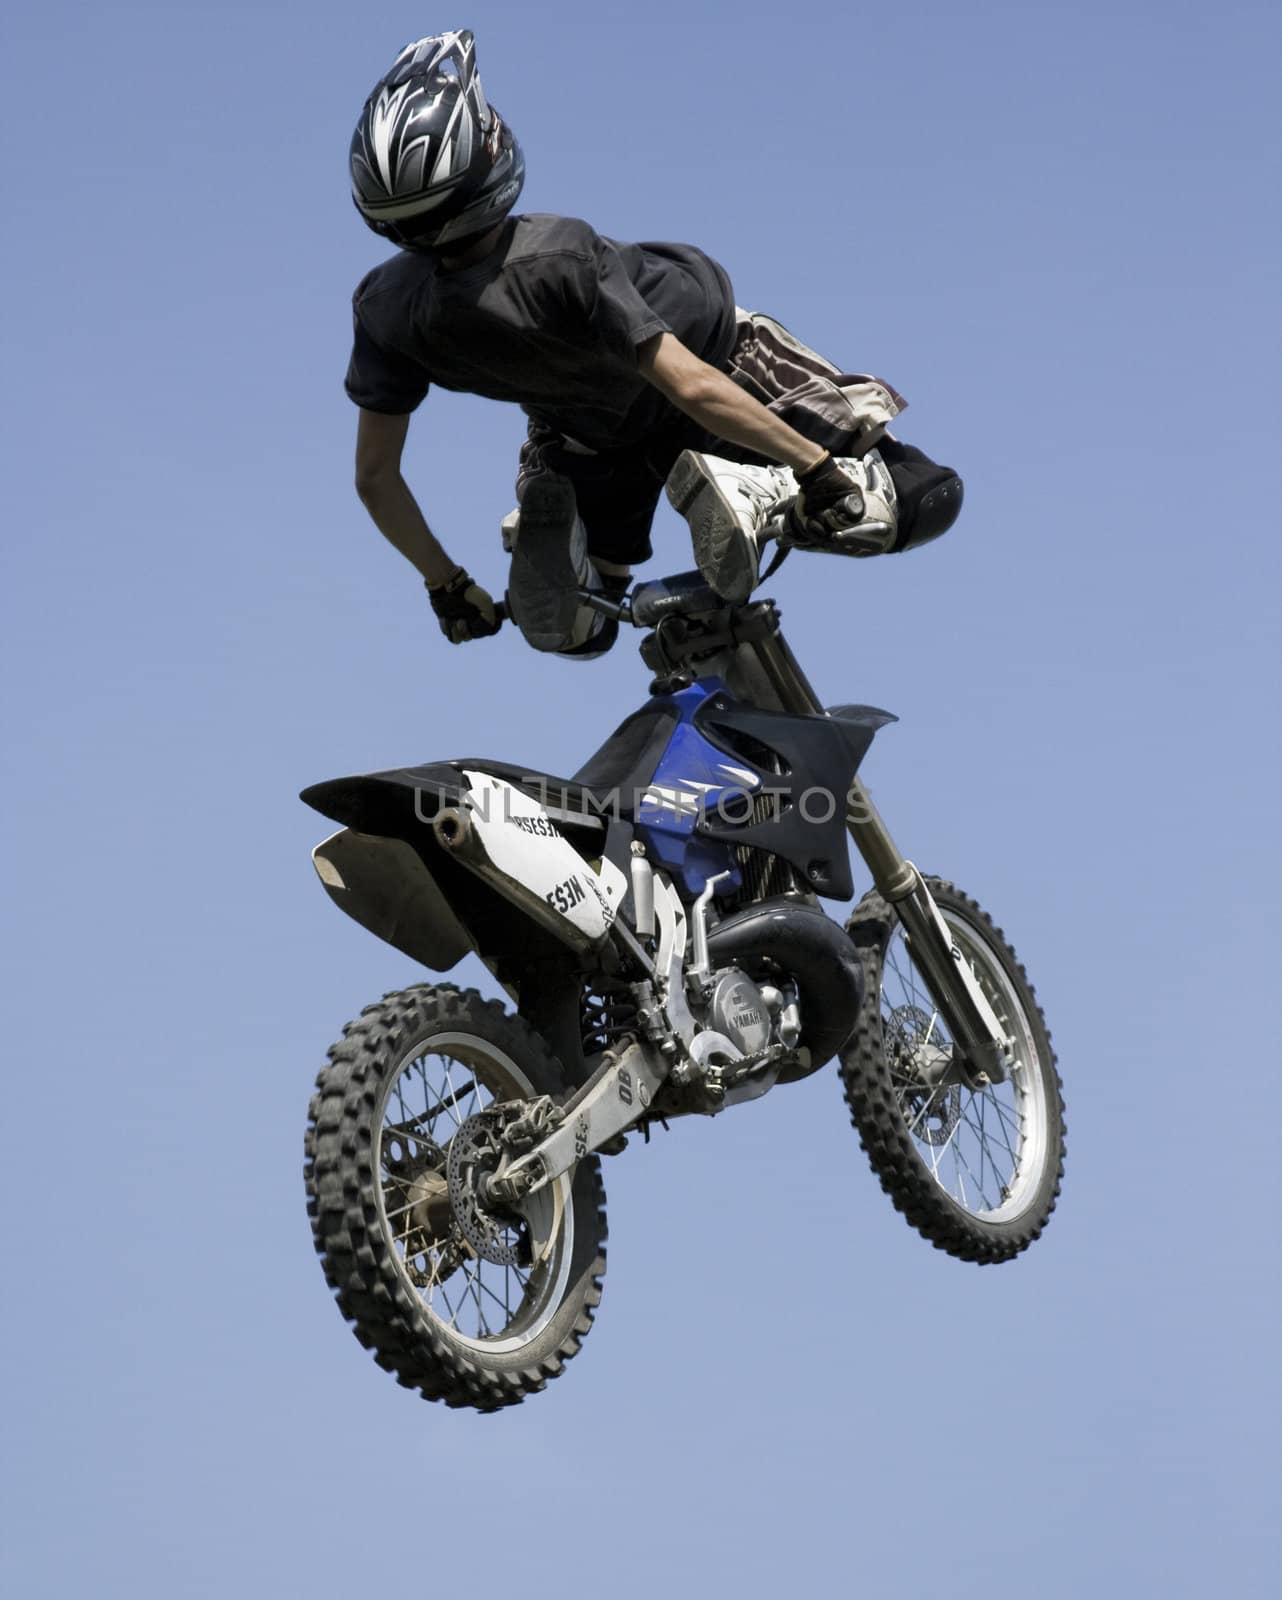 Outdoor shot, extreme rider performing a trick.